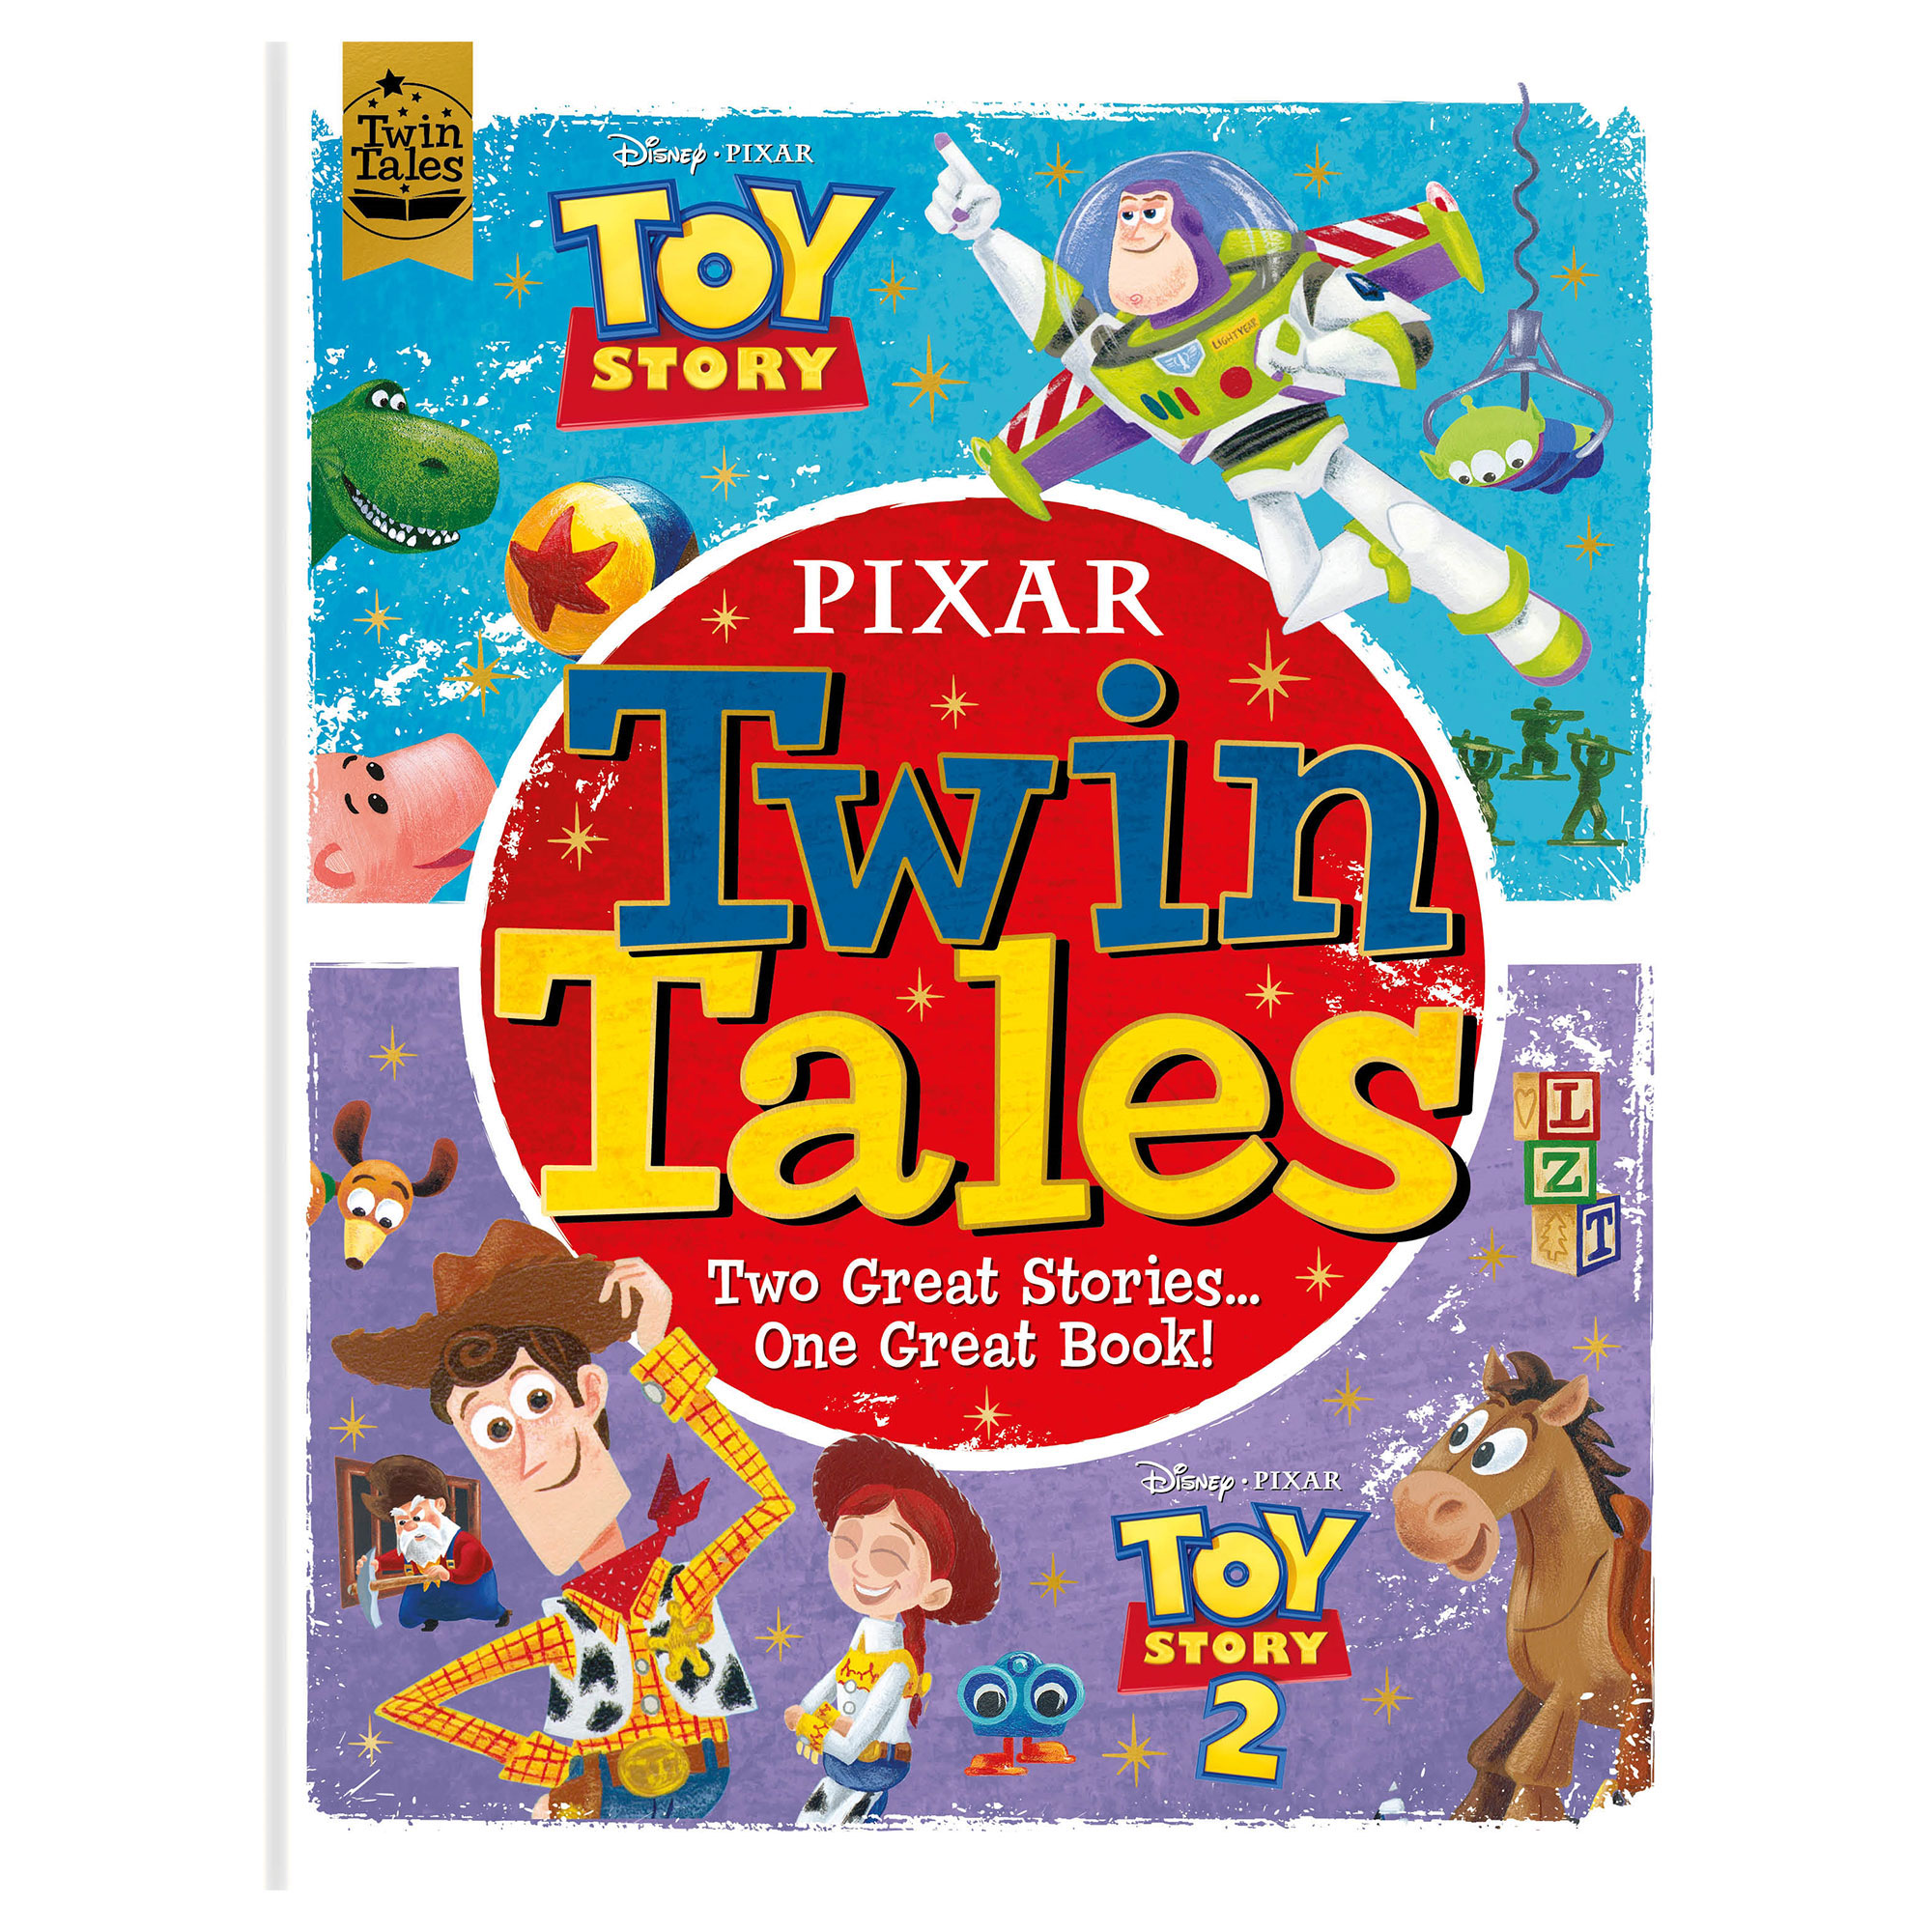 Pixar: Twin Tales Toy Story 1 & 2